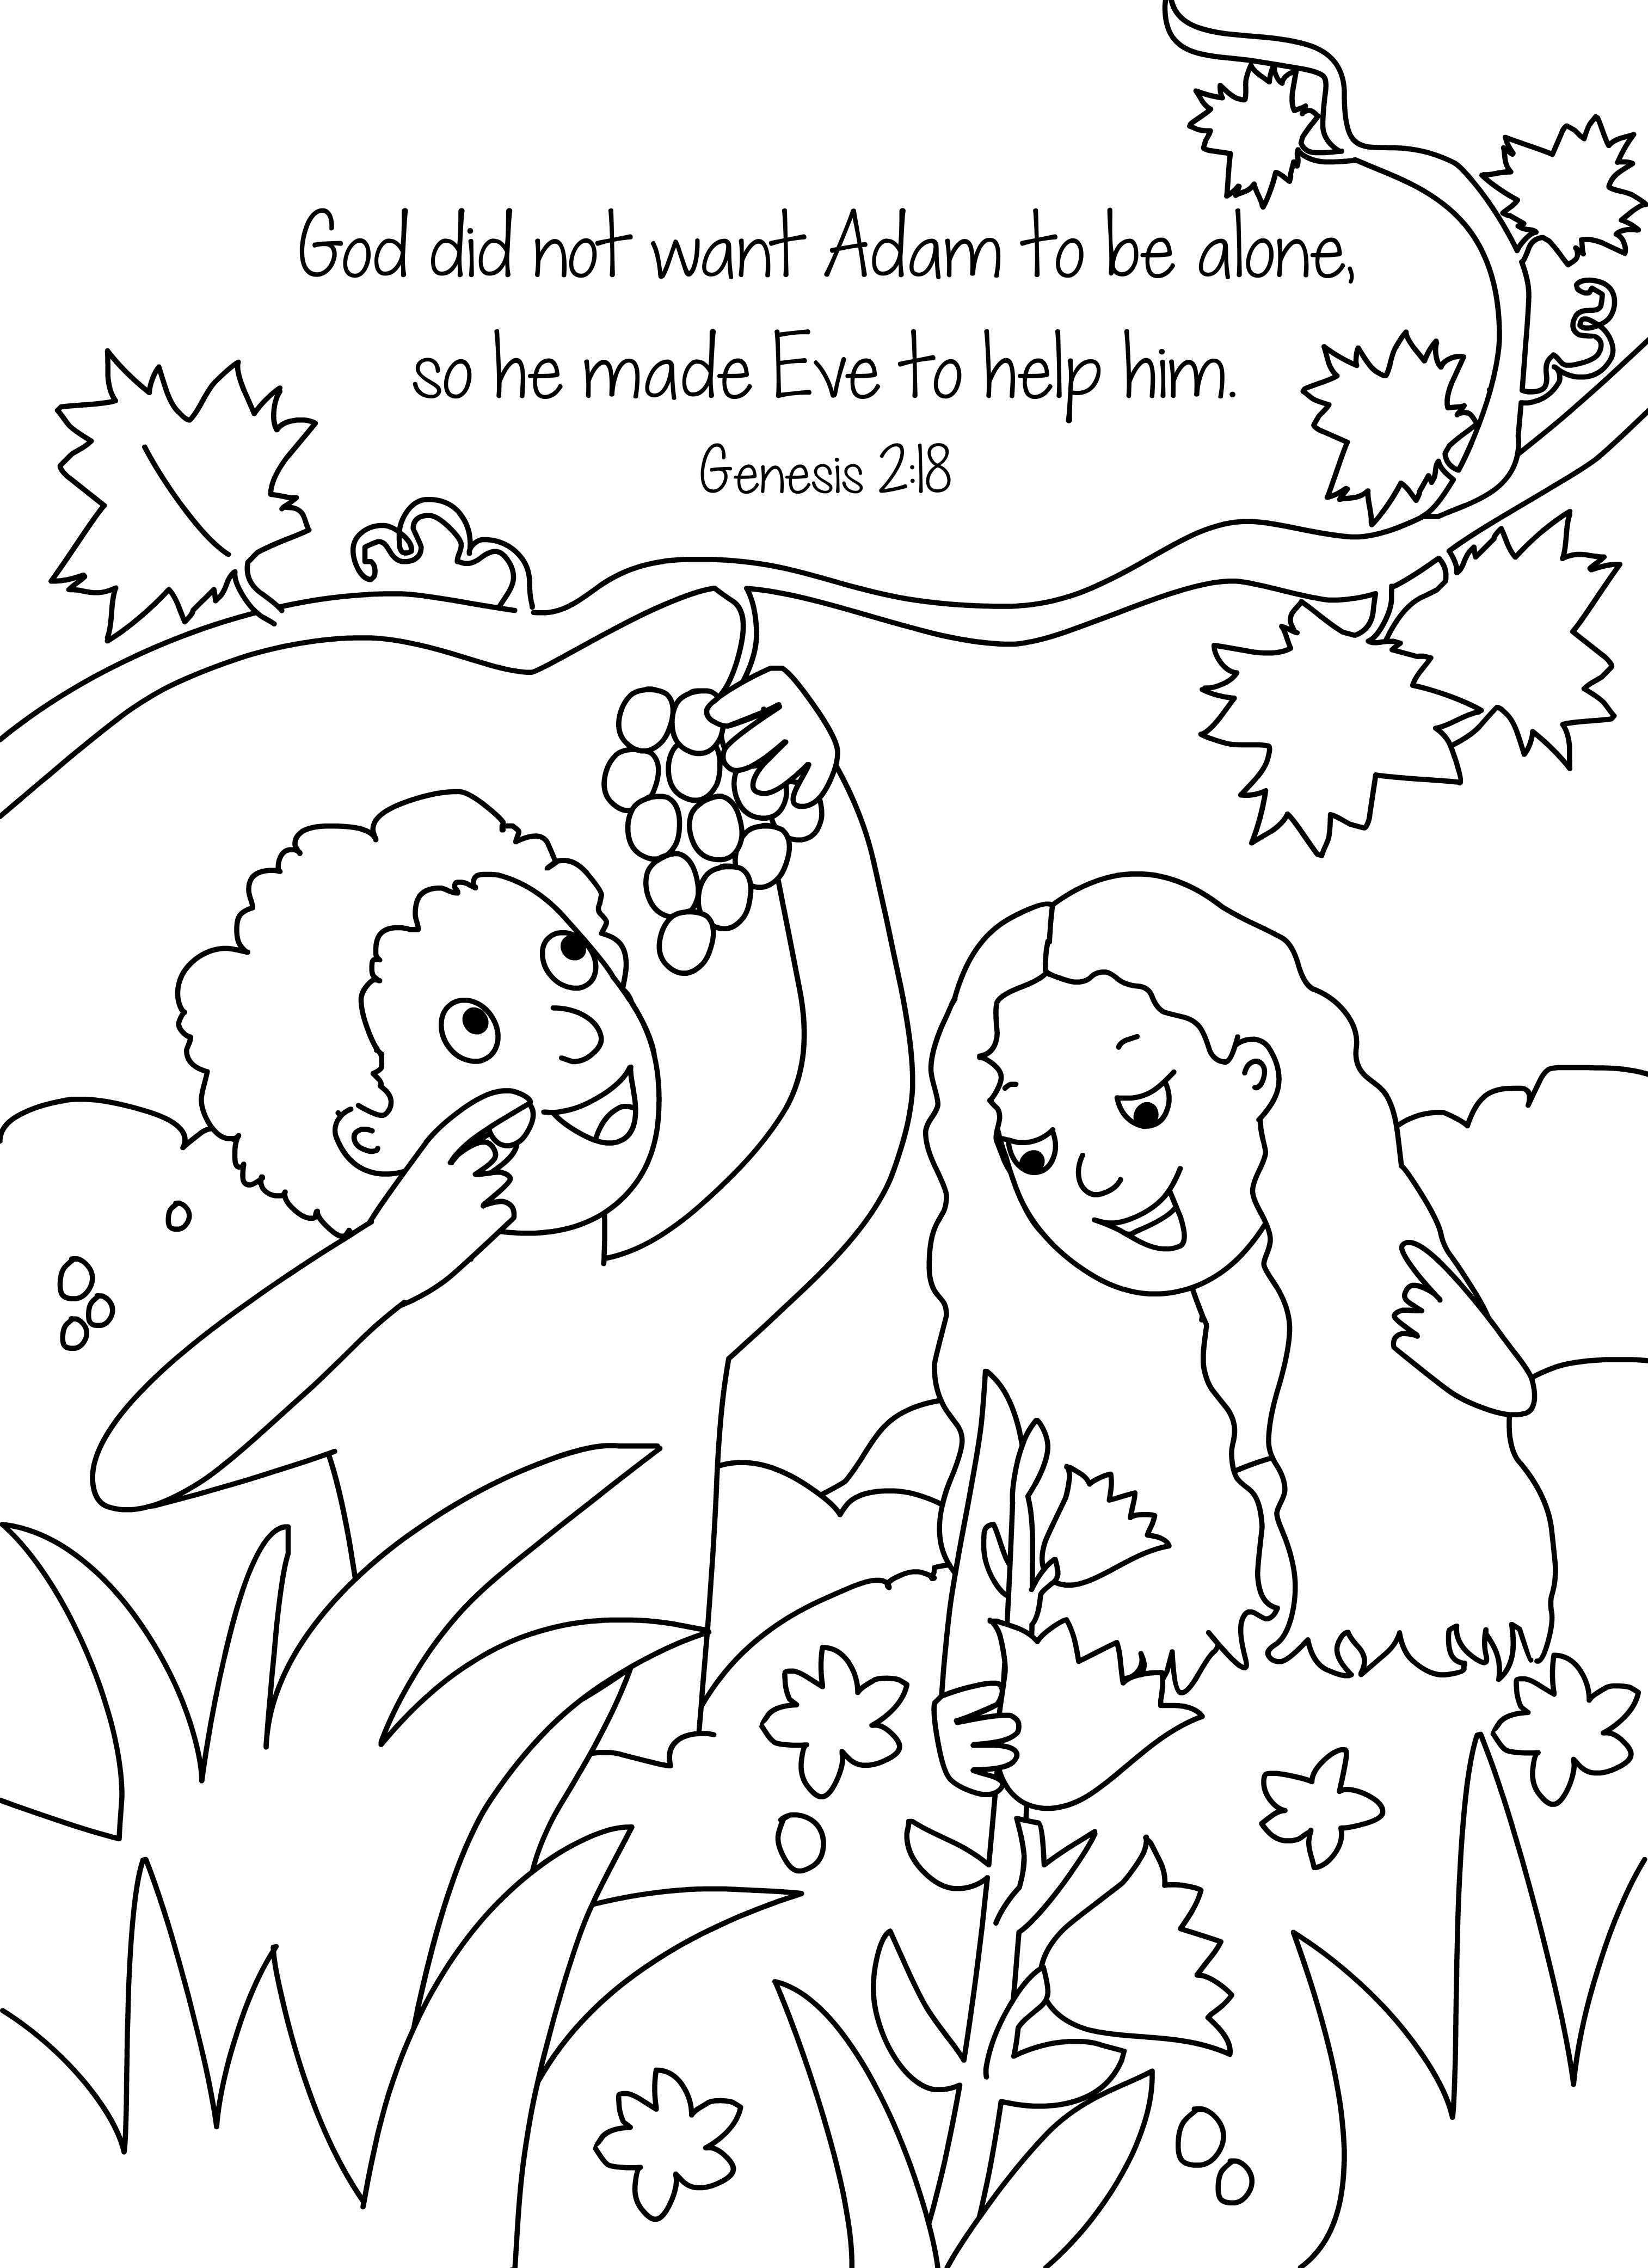 bible-key-point-coloring-page-adam-and-eve-free-children-s-videos